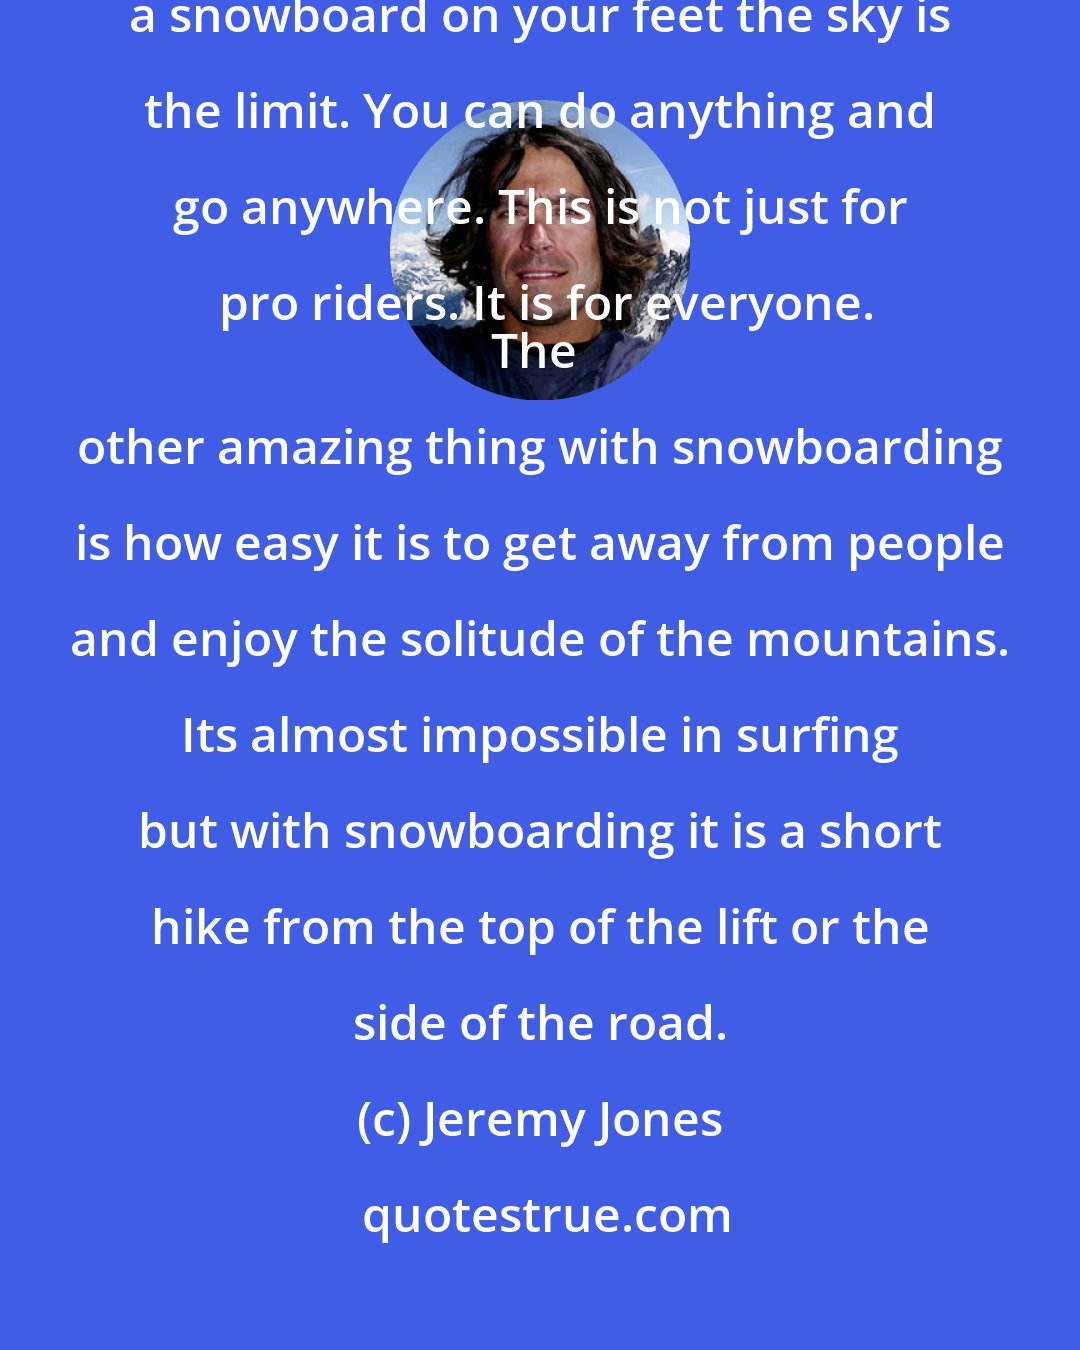 Jeremy Jones: The attraction of snowboarding is the freedom it gives you. With a snowboard on your feet the sky is the limit. You can do anything and go anywhere. This is not just for pro riders. It is for everyone.
The other amazing thing with snowboarding is how easy it is to get away from people and enjoy the solitude of the mountains. Its almost impossible in surfing but with snowboarding it is a short hike from the top of the lift or the side of the road.